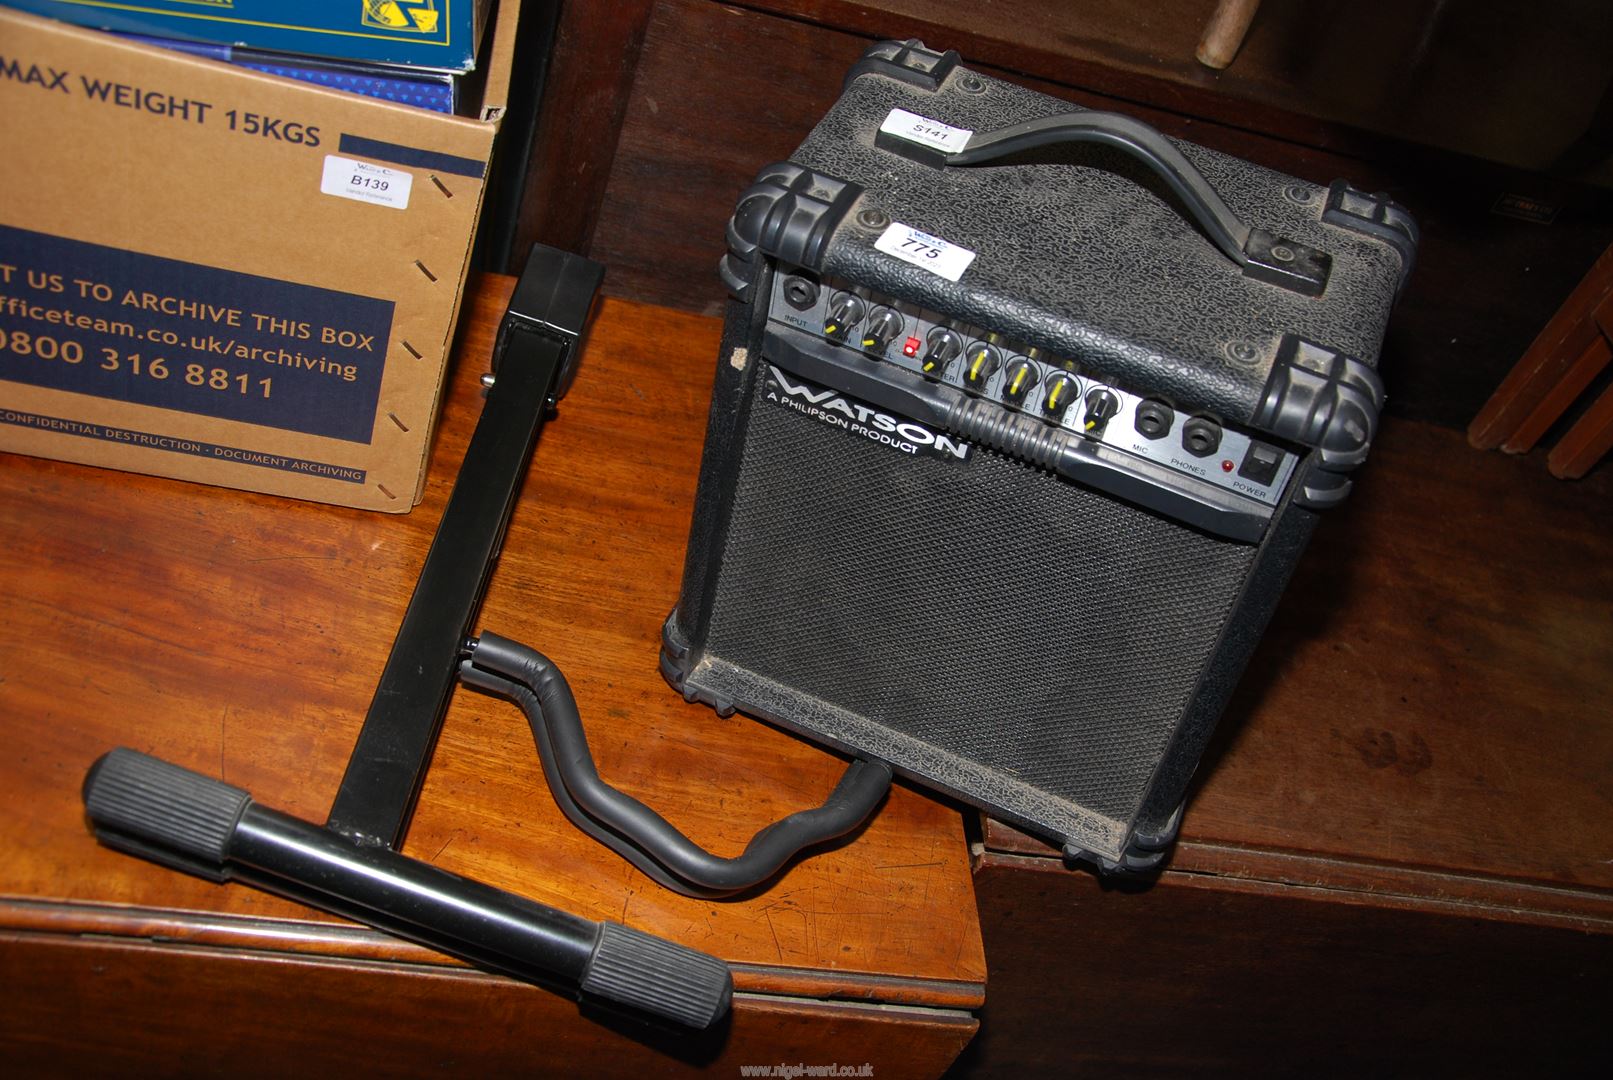 A "Squire" electric guitar by Fender, a small Watson's Amplifier/speaker plus stand.